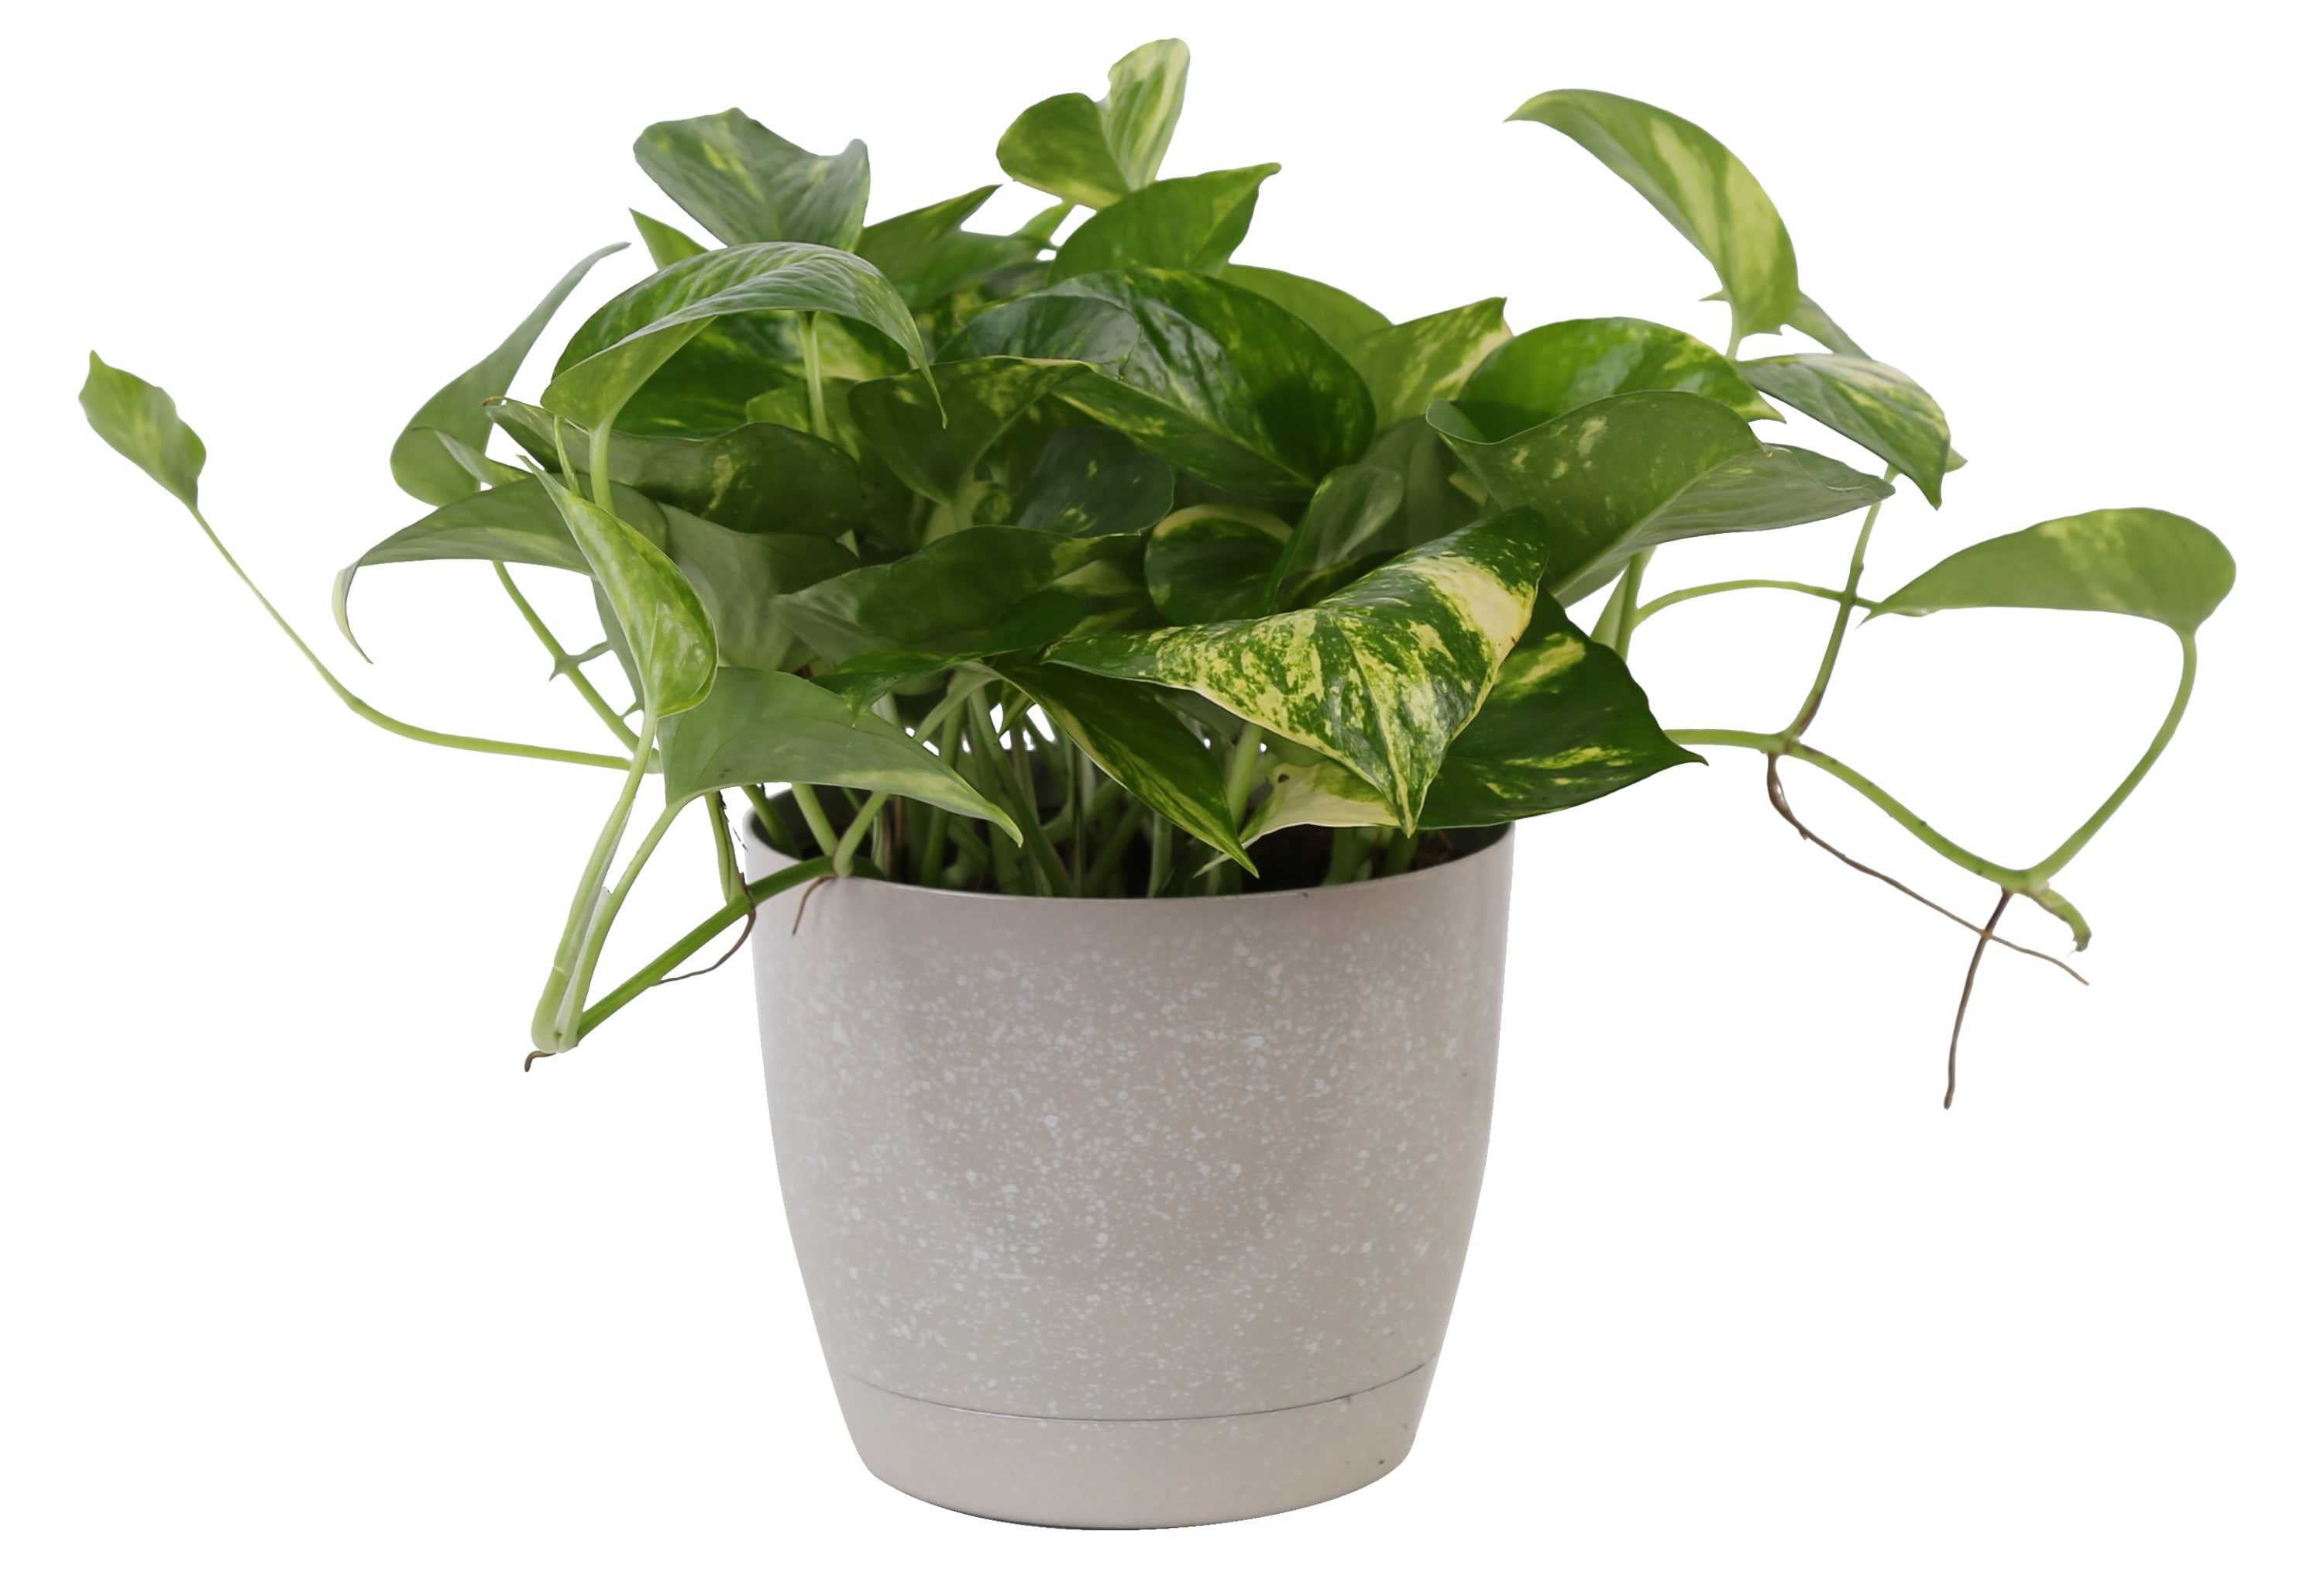 Costa Farms Devil's Ivy Golden Pothos House Plant in 6-in Pot | CO.GP6.1.WW.RED